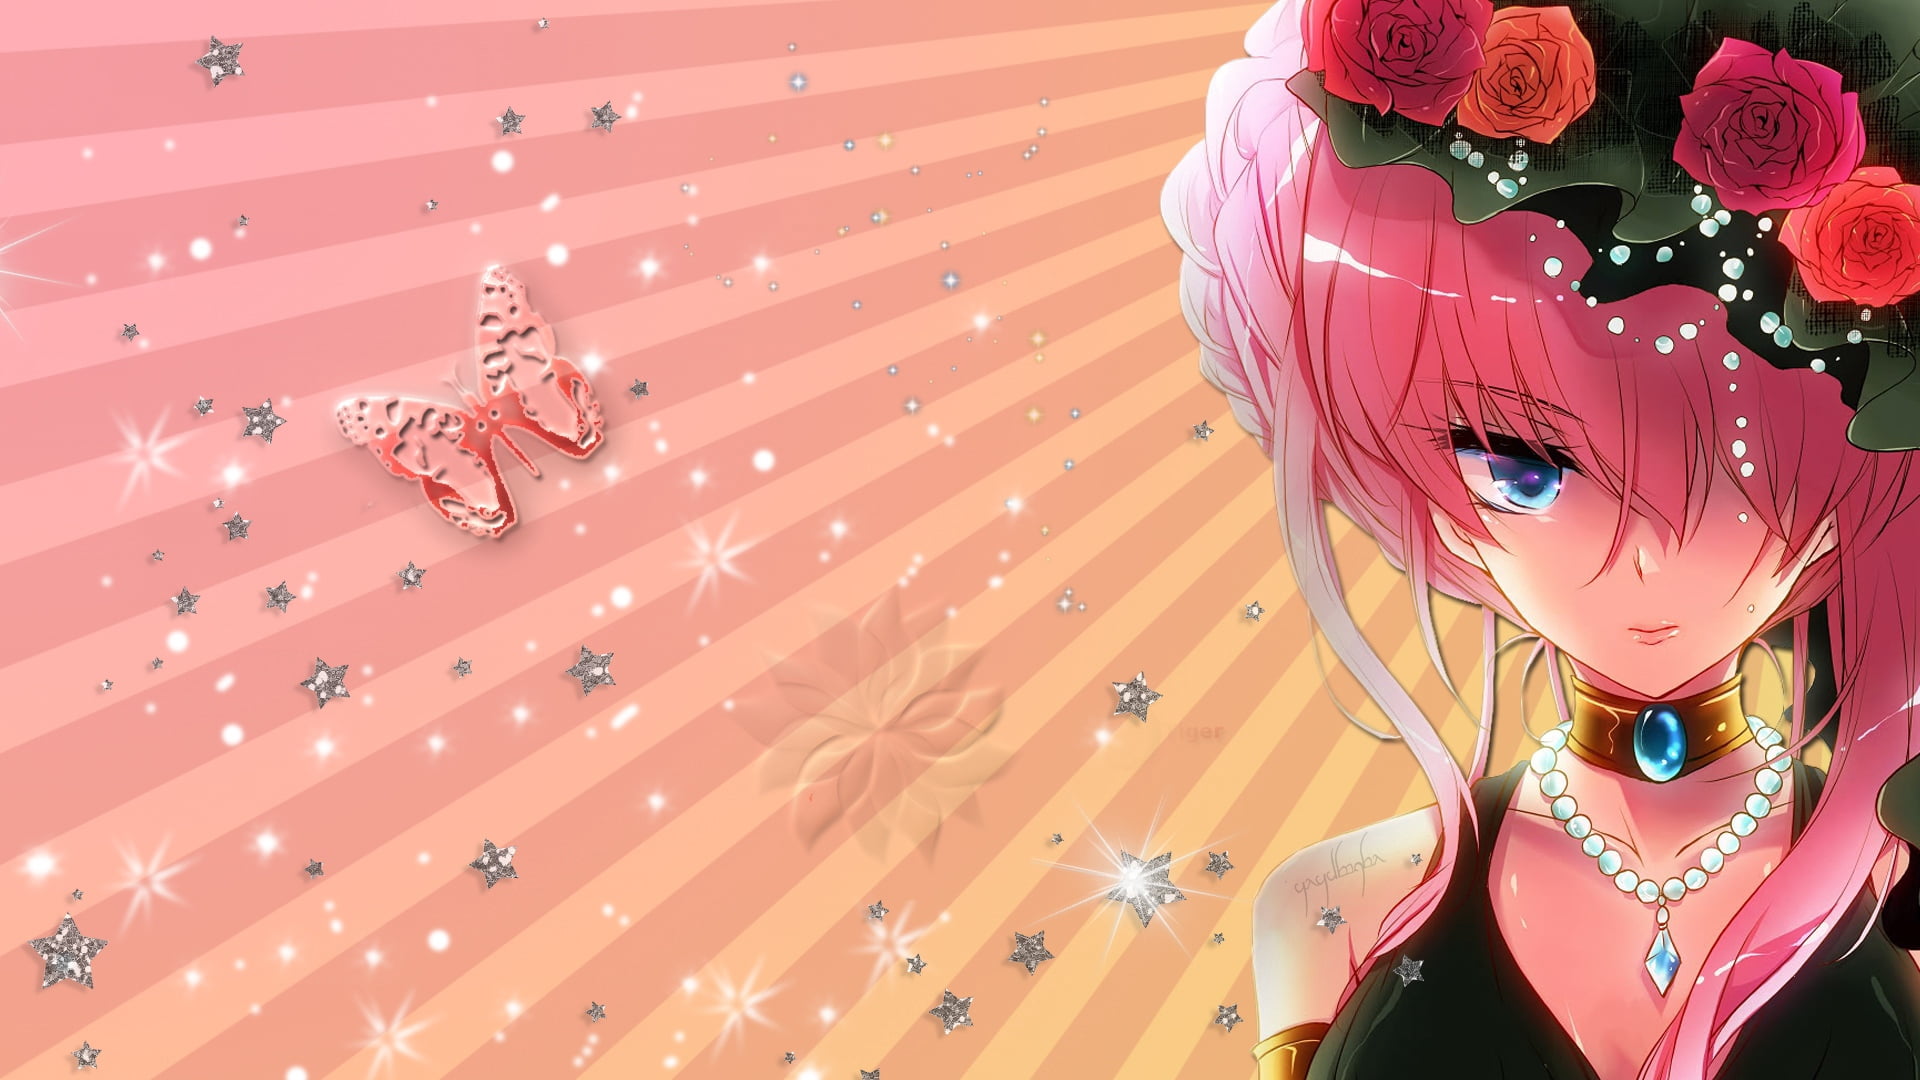 pink haired girl illustration, anime, wreath, rose, decoration